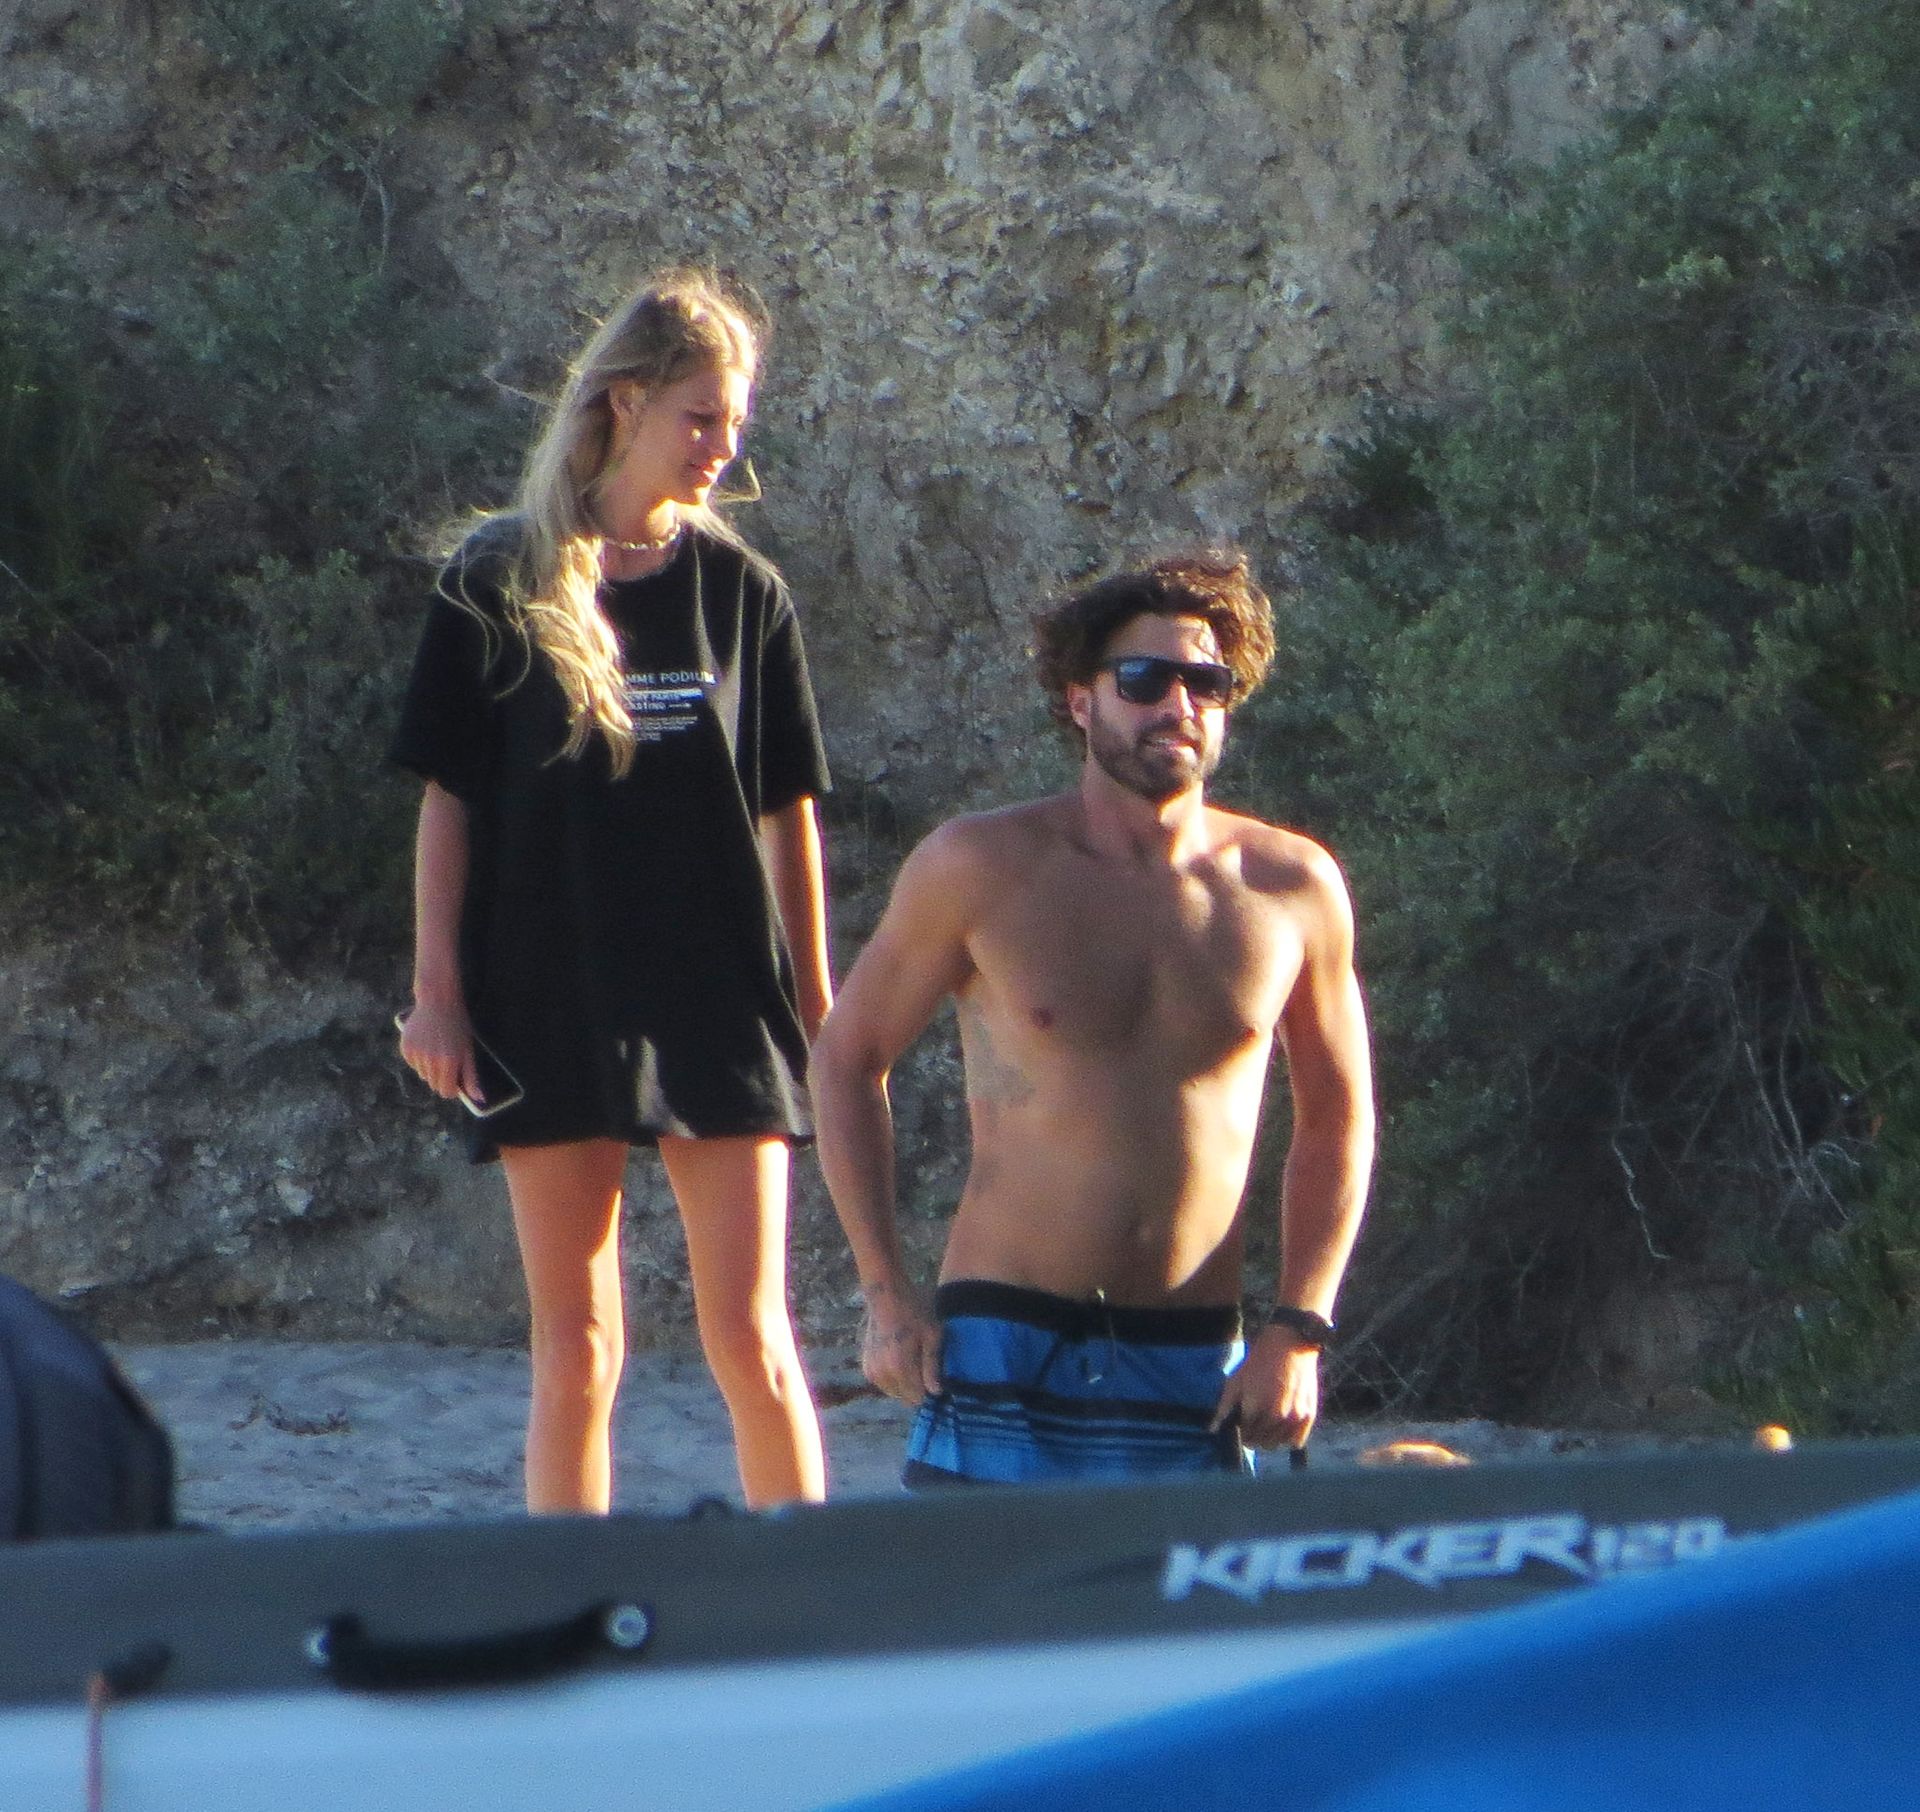 Brody Jenner Gets Cozy with Briana Jungwirt
h During Flirty Malibu Beach Day (61 Photos)